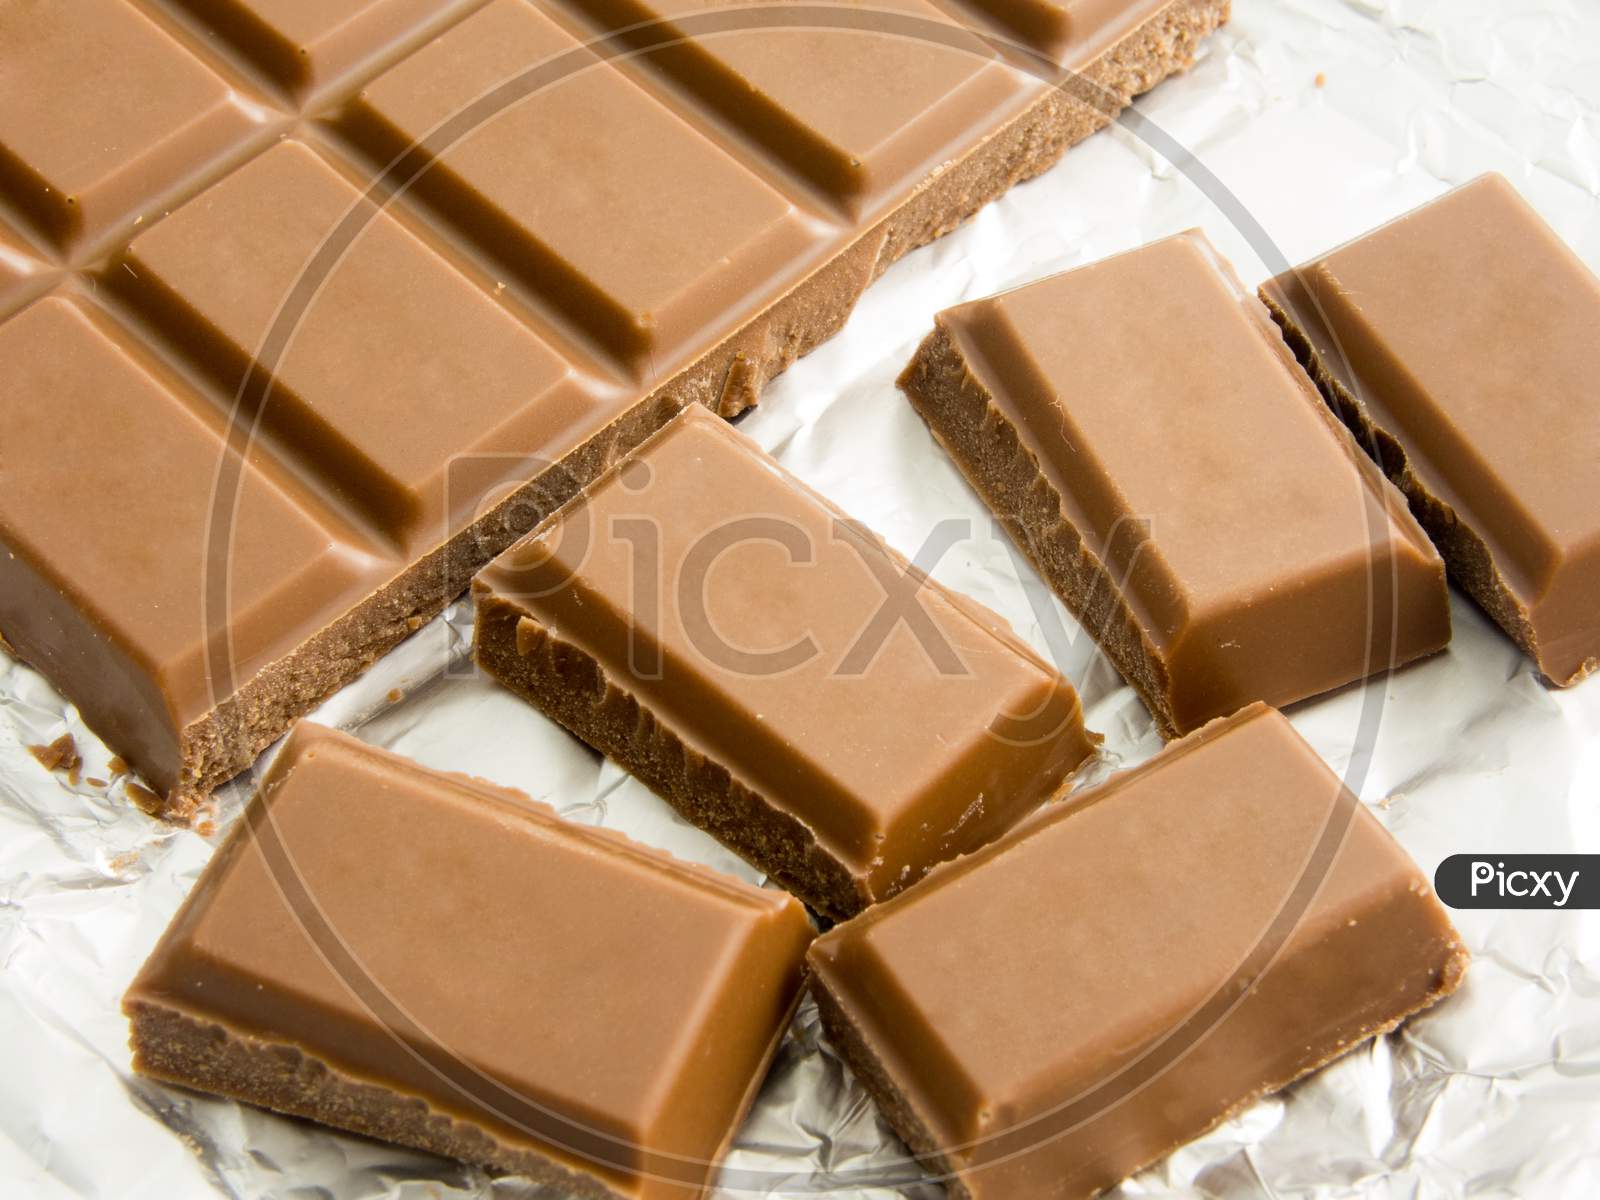 bites of delicious chocolate bar on foil packaging